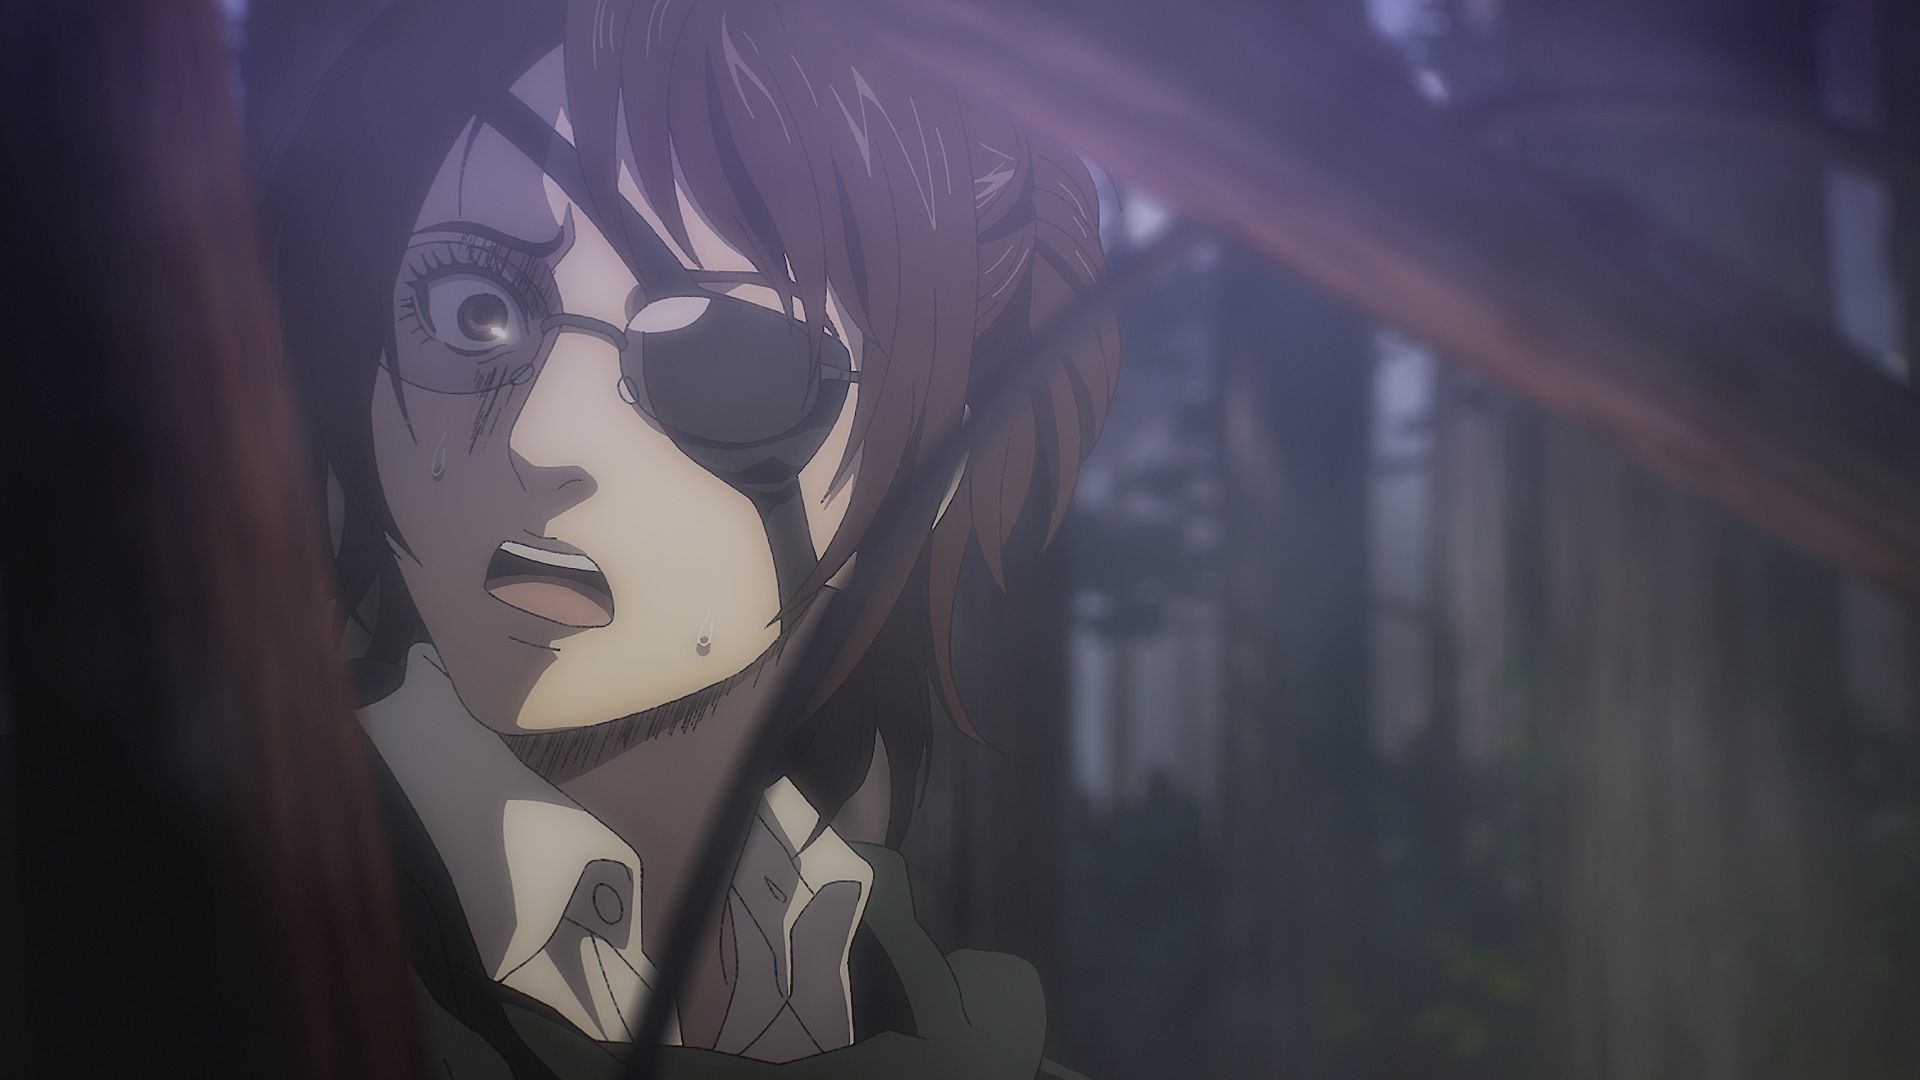 Attack on Titan viewers react to major death in special episode